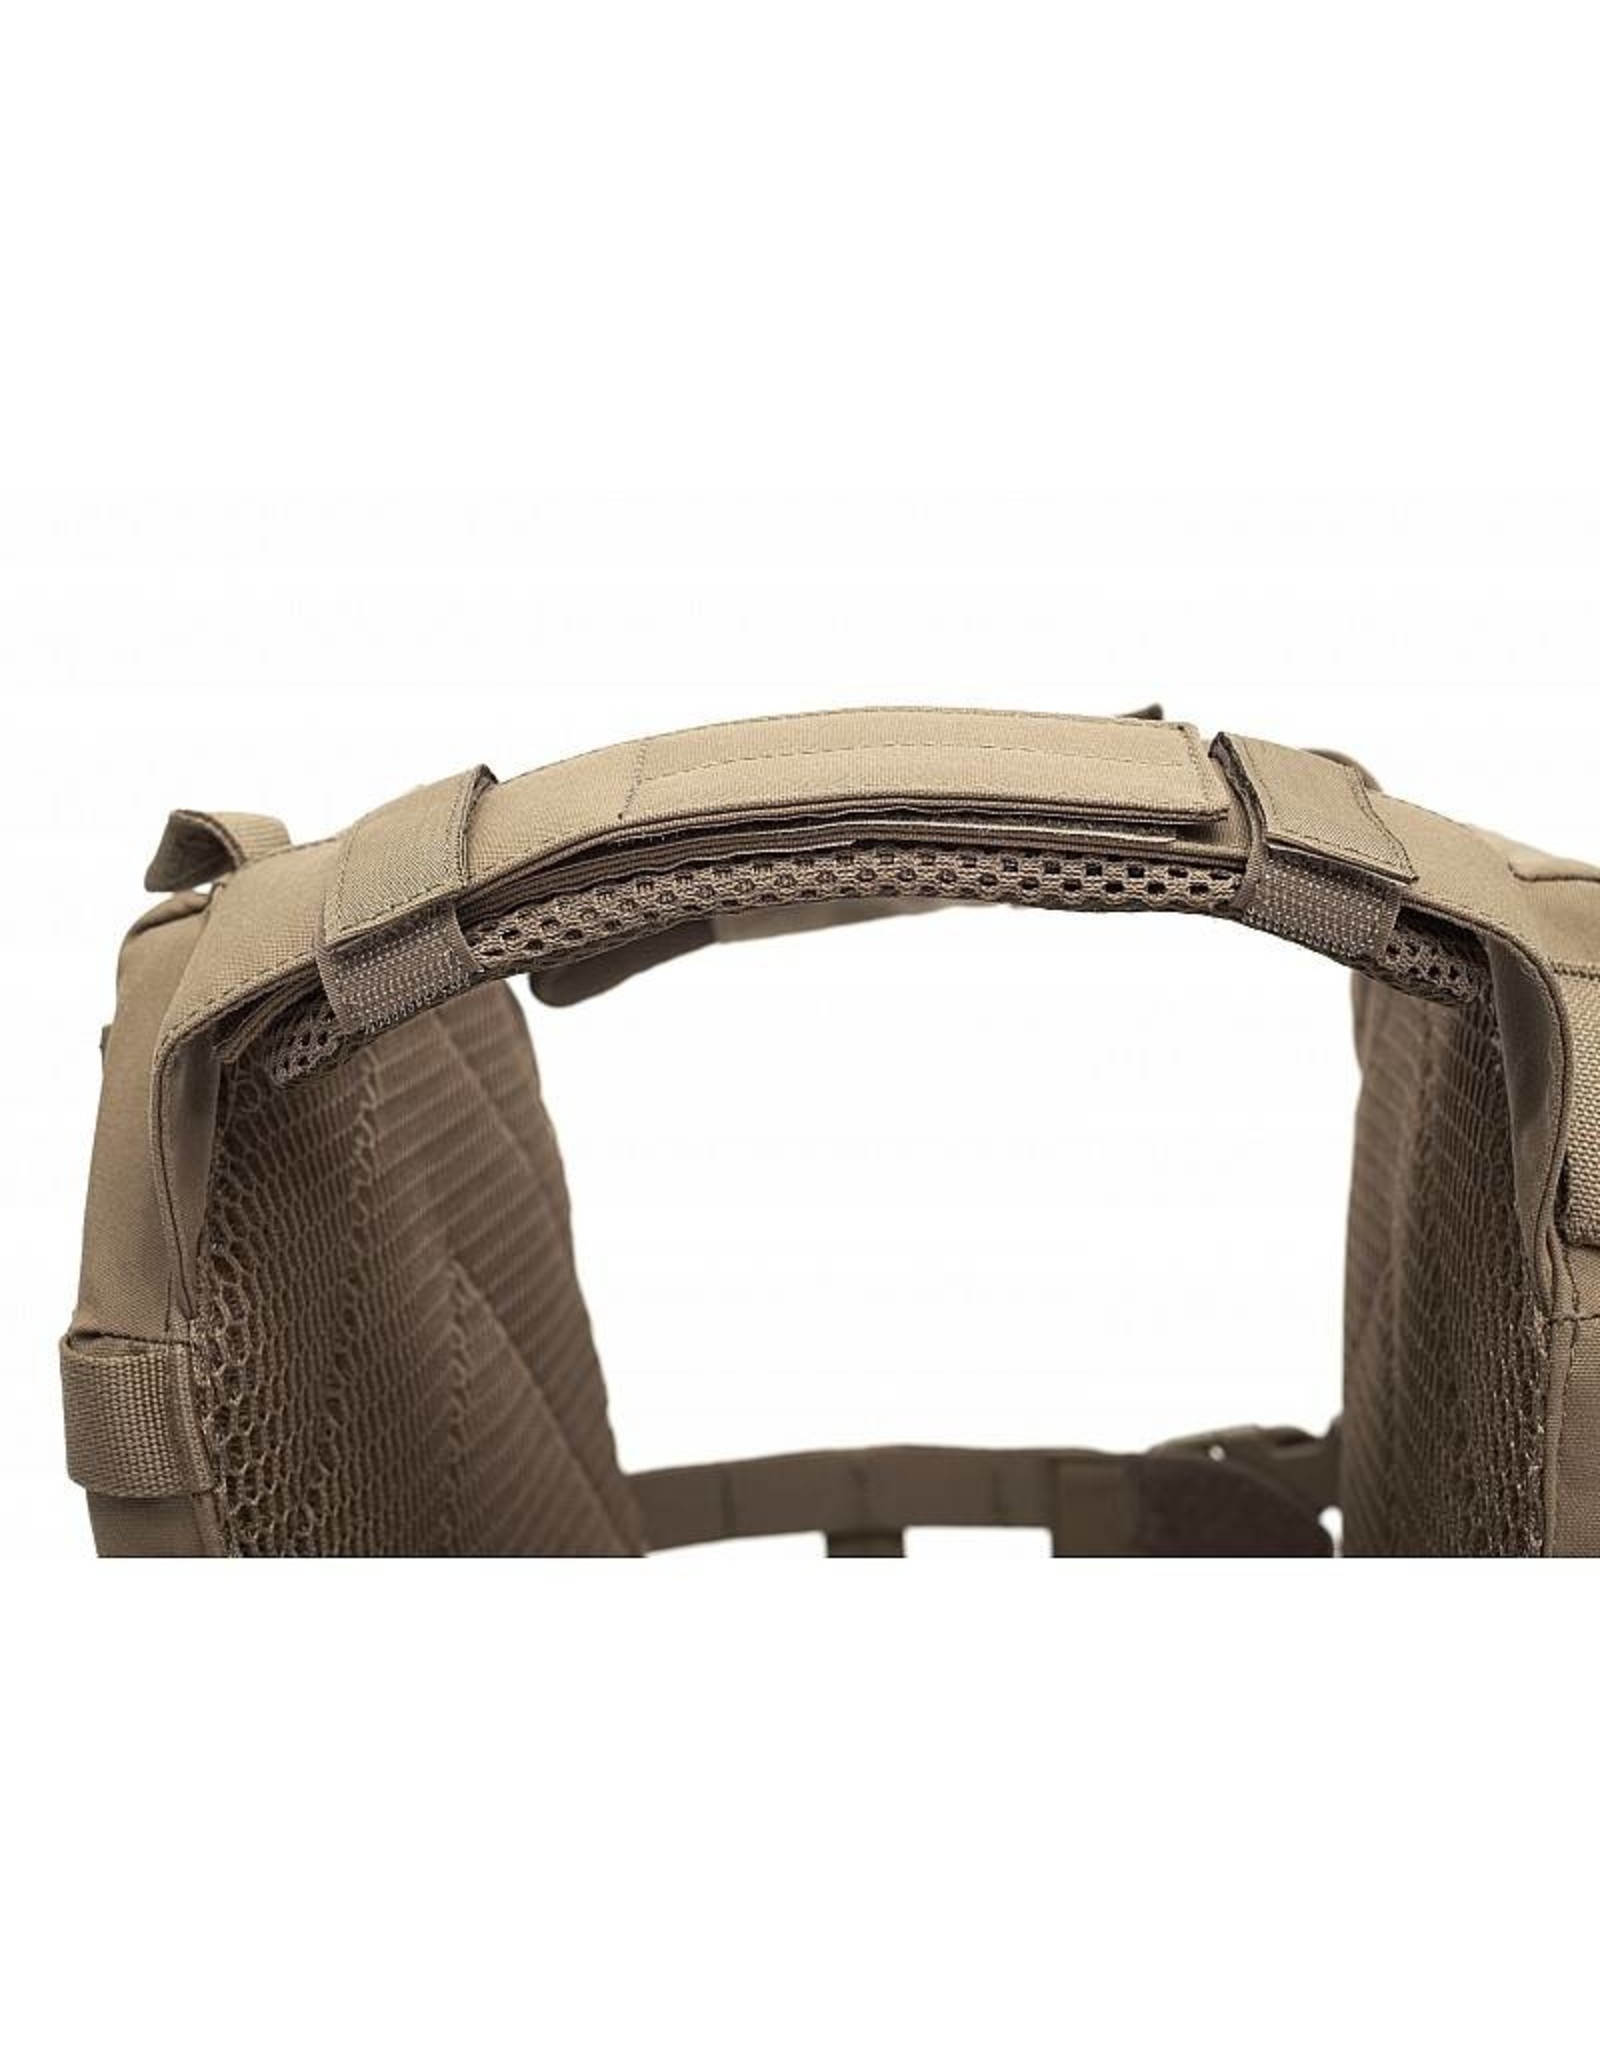 Warrior Recon Plate Carrier SAPI - Coyote Tan